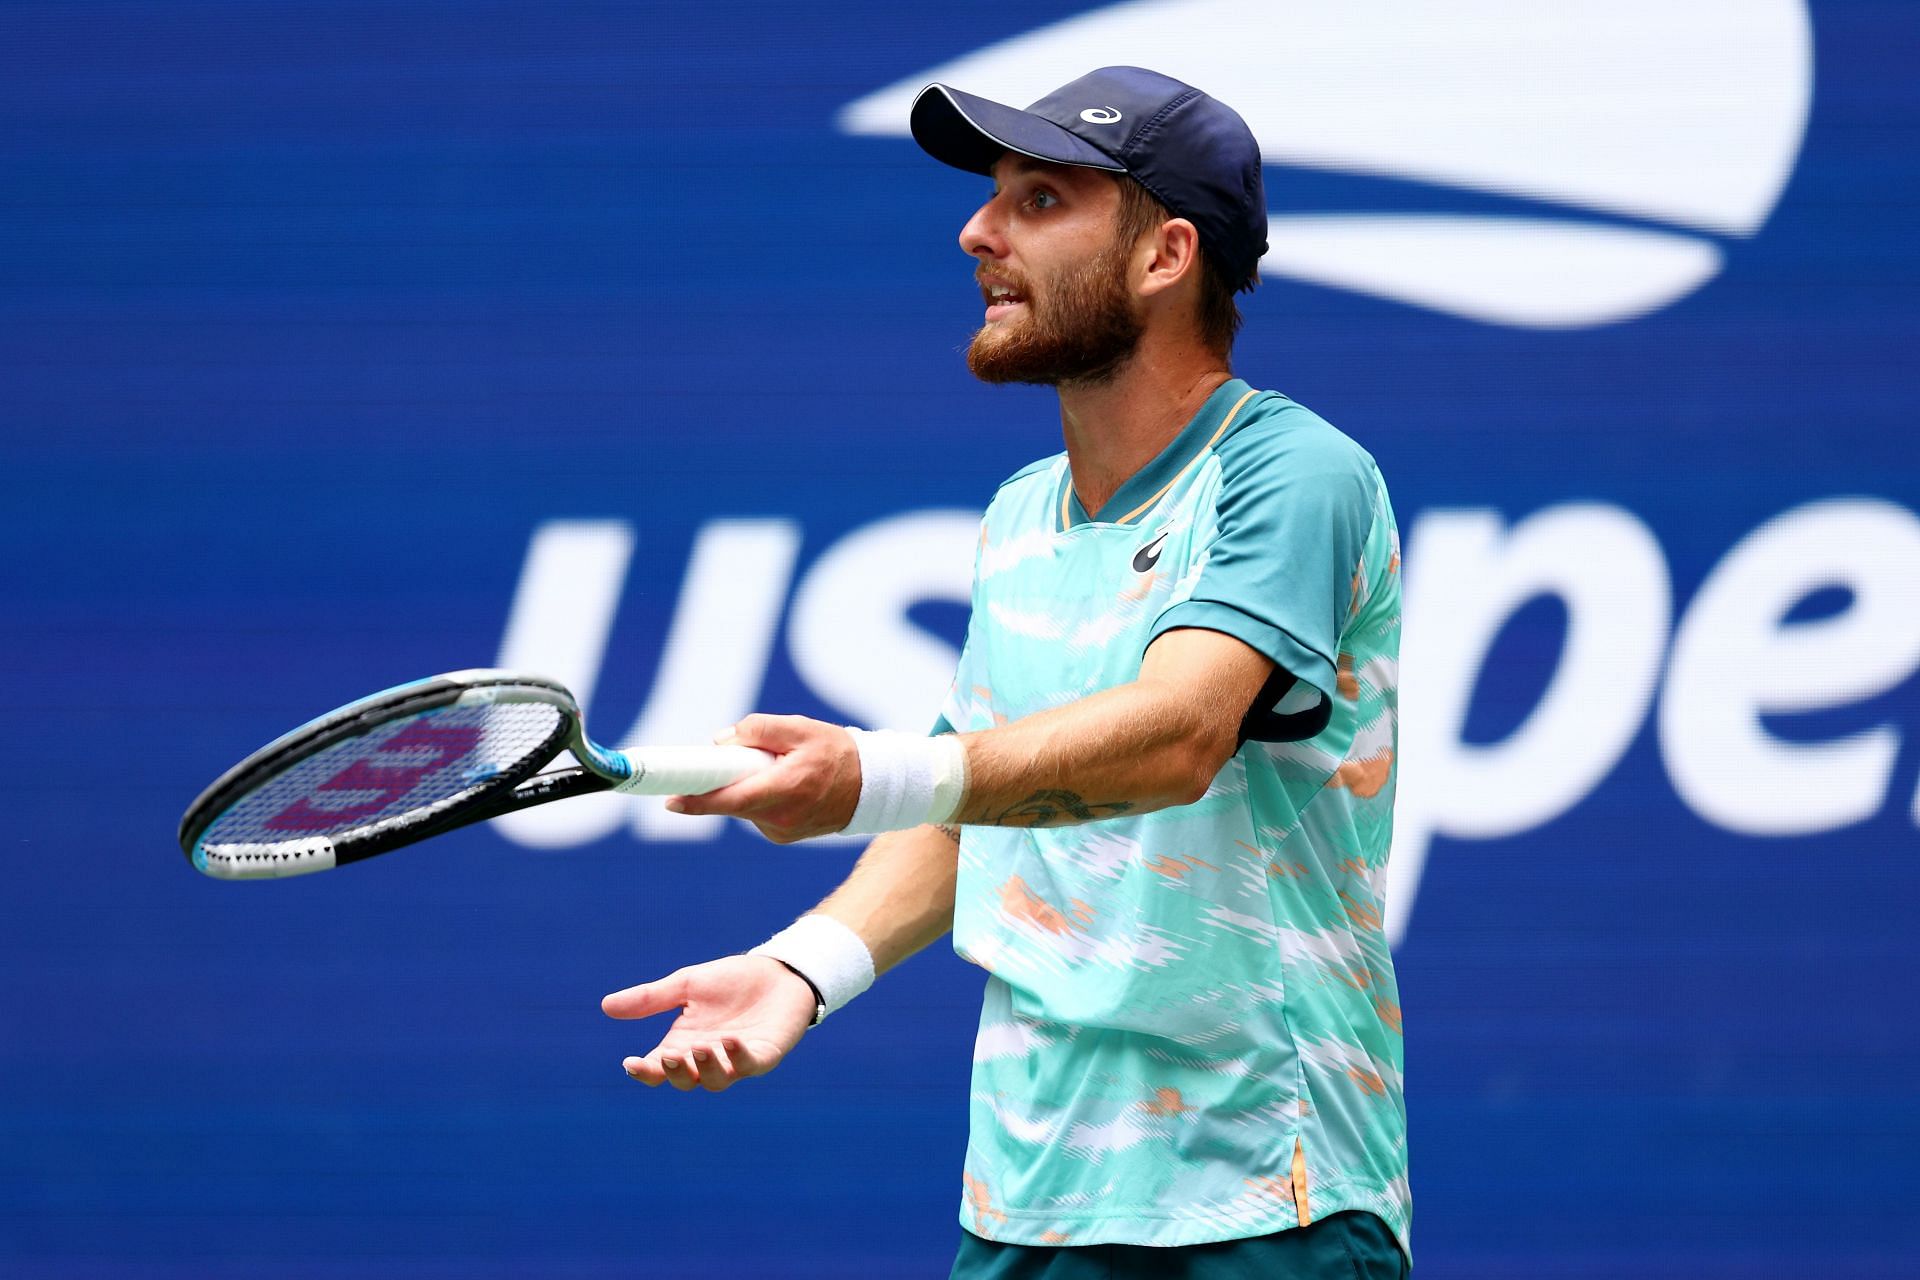 Corentin Moutet at US Open 2022. Photo by Elsa/Getty Images